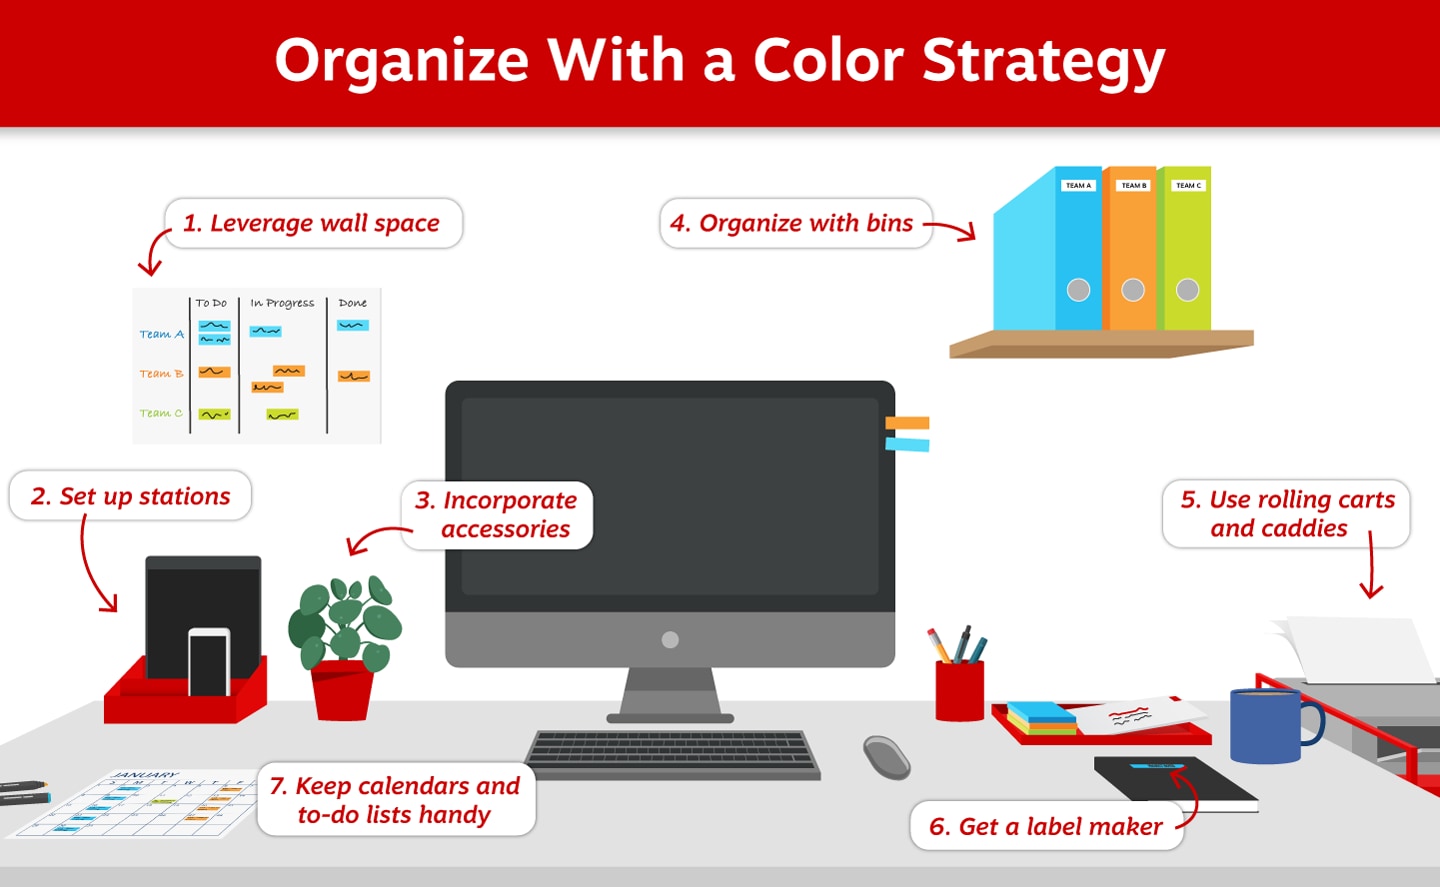 https://marketingassets.staples.com/m/2b16af3b500121f5/original/How-to-Upgrade-Your-Home-Office-Organization-With-Color.png